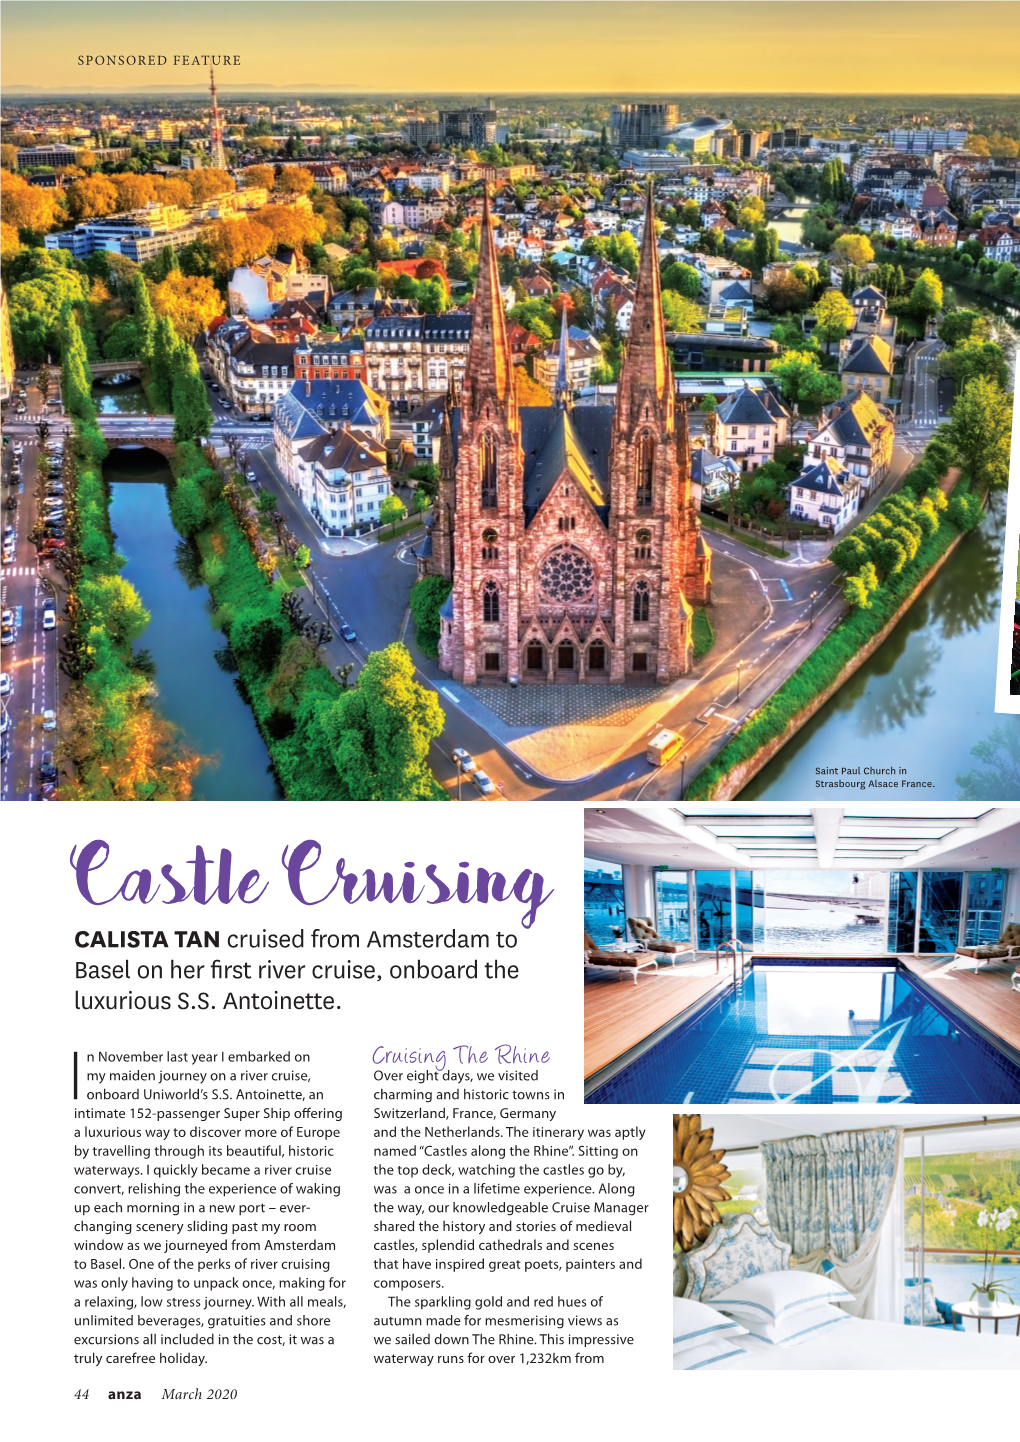 CALISTA TAN Cruised from Amsterdam to Basel on Her First River Cruise, Onboard the Luxurious S.S. Antoinette. Cruising the Rhine